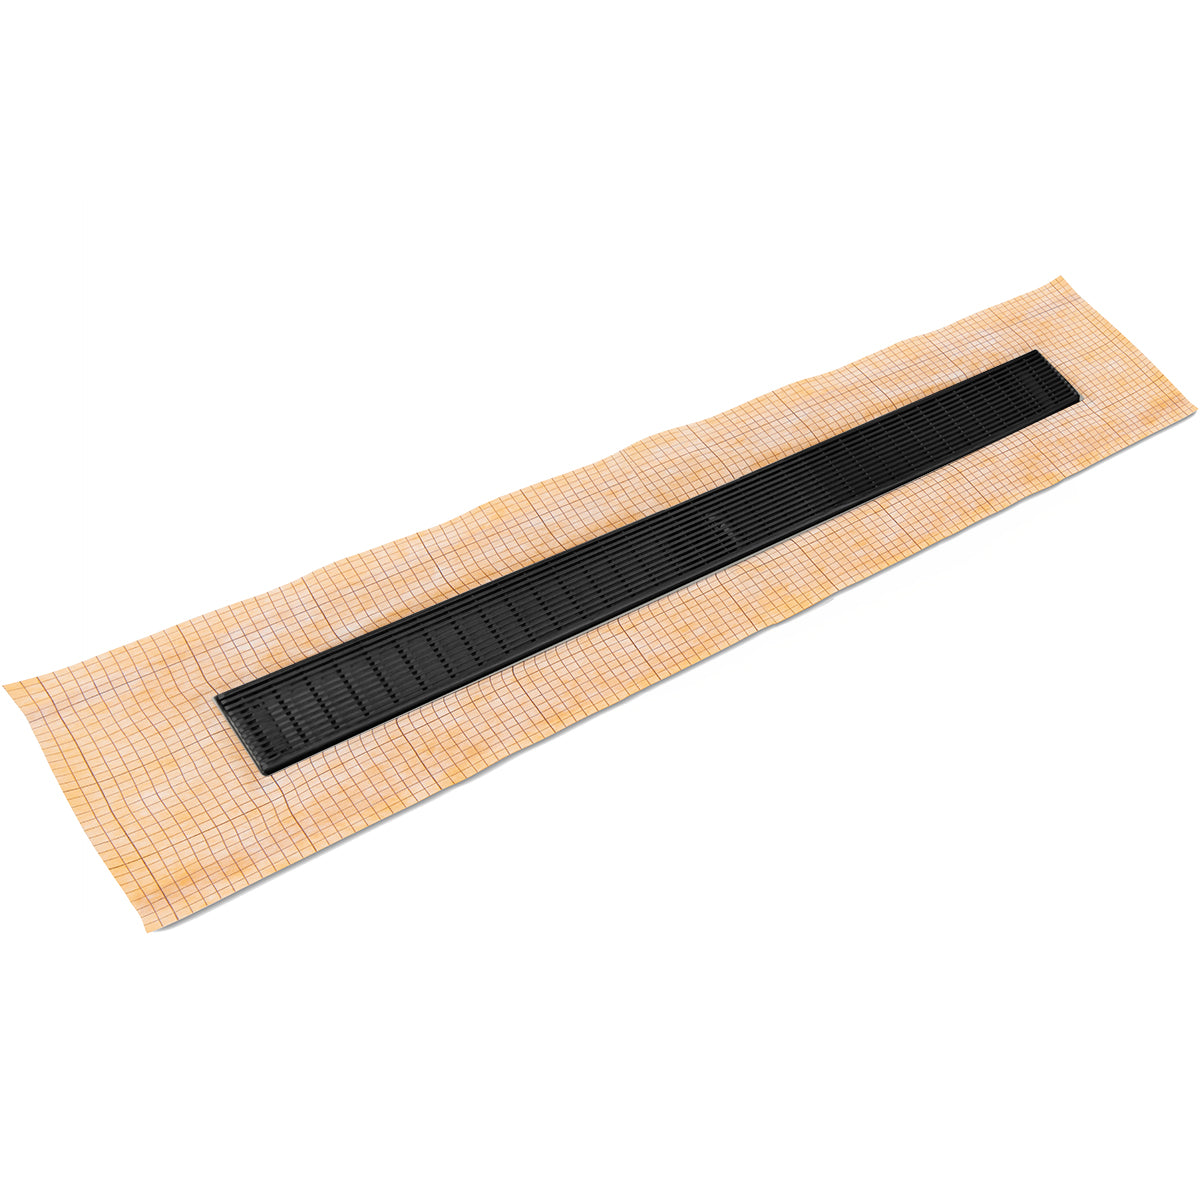 Infinity Drain 32" FCS Series Schluter-Kerdi - Fixed Flange Linear Drain Kit with 2 1/2" Wedge Wire Grate